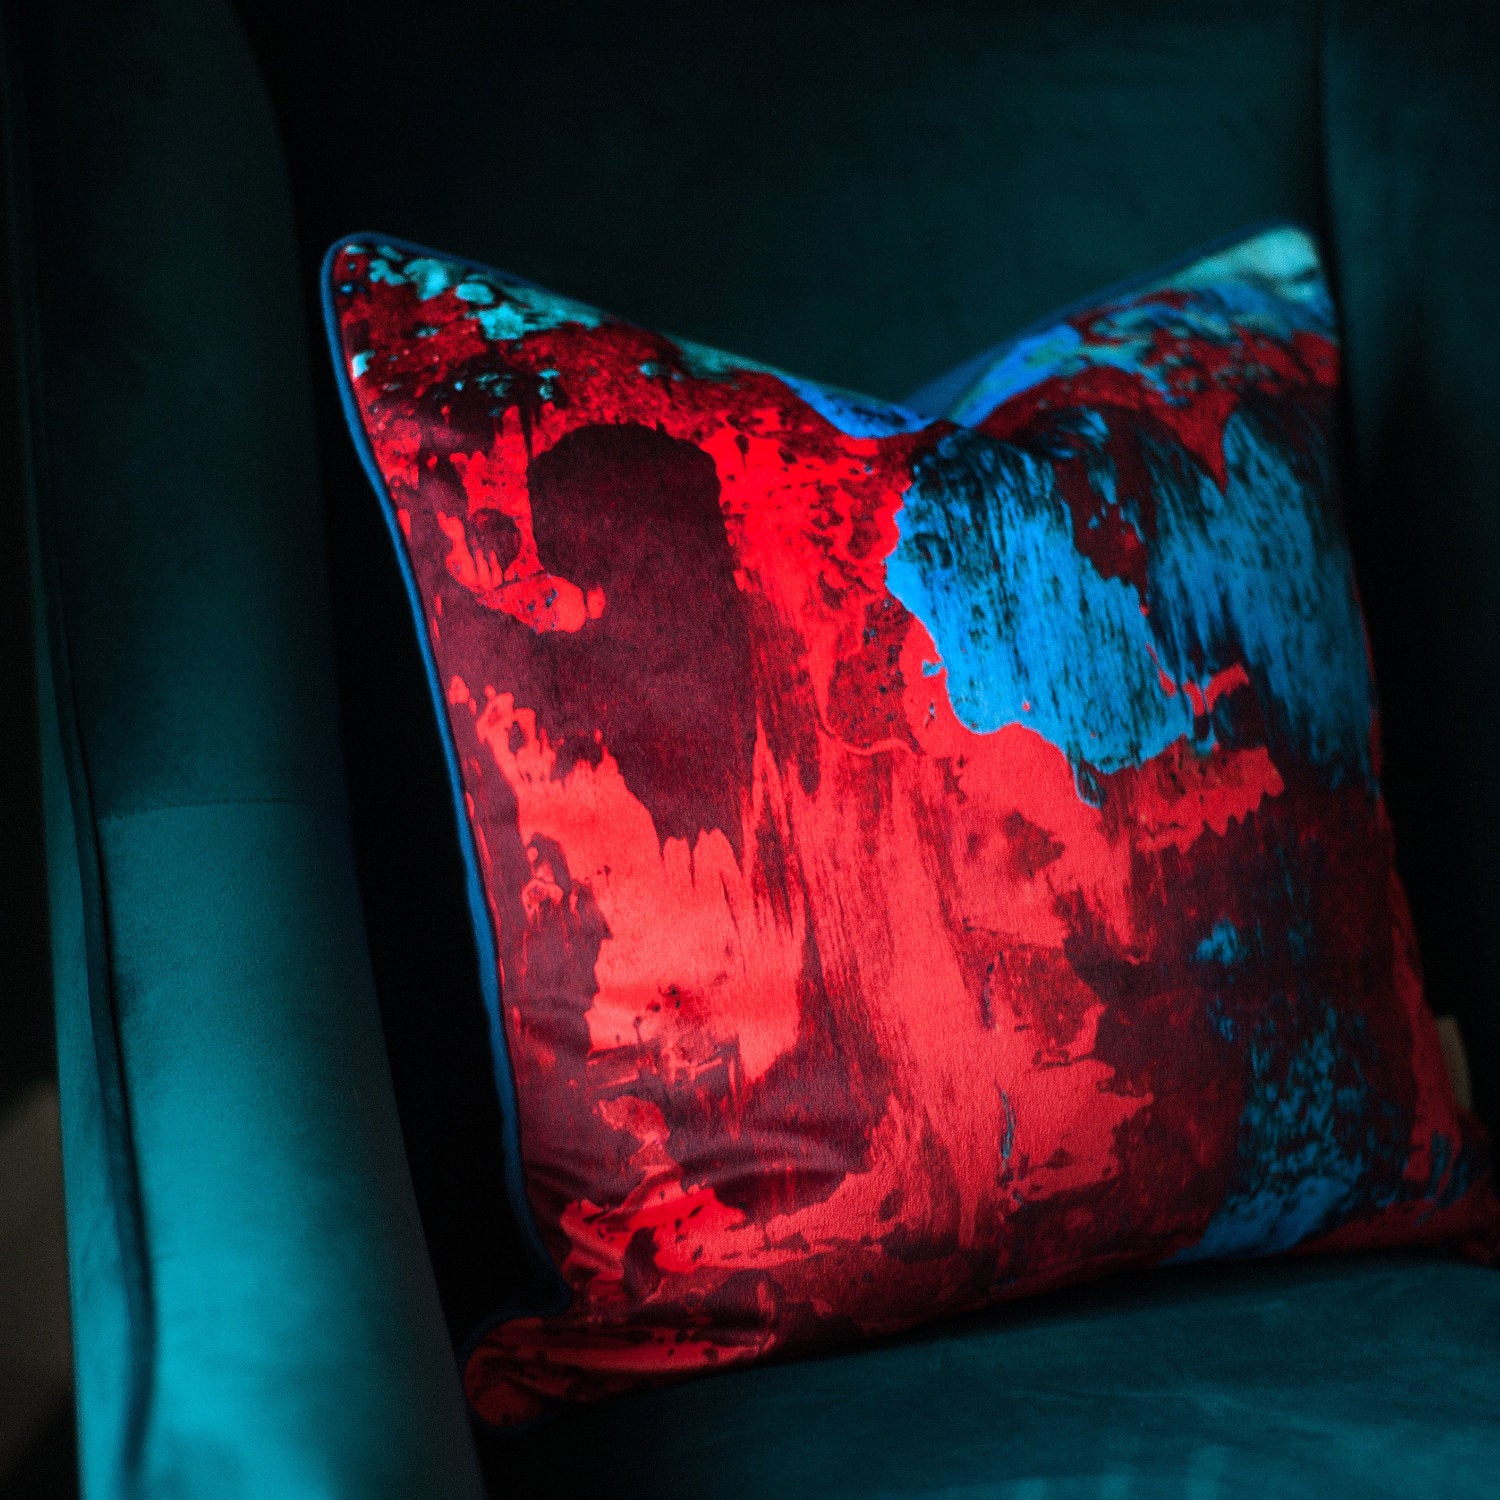 Red/Blue Geode Abstract Velvet Square Cushion